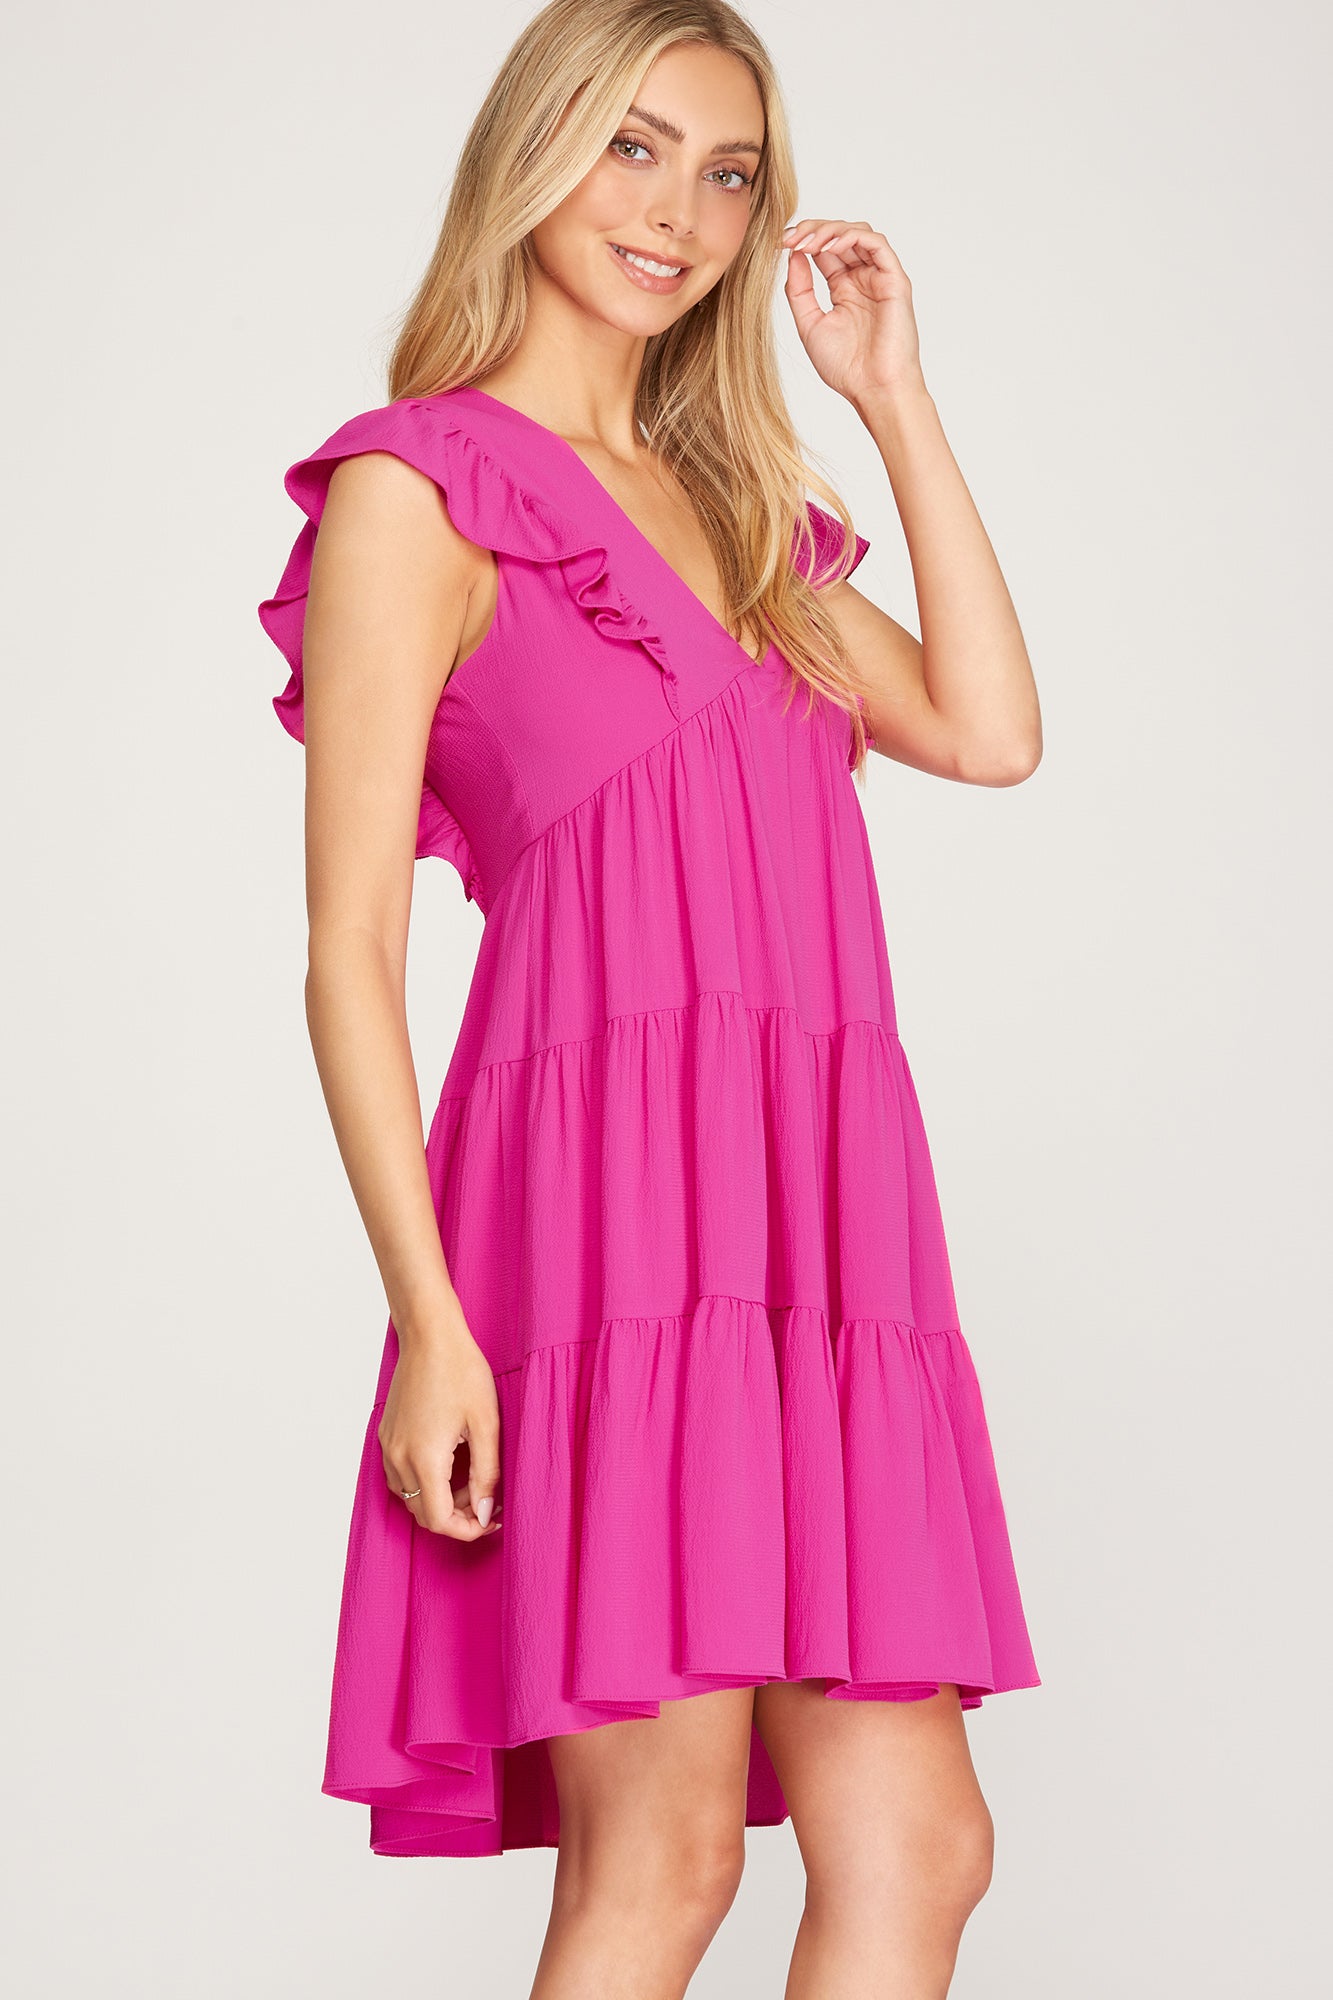 She+Sky Ready For Anything Dress-Magenta Pink, short ruffle sleeves, v-neck, tiered, curvy